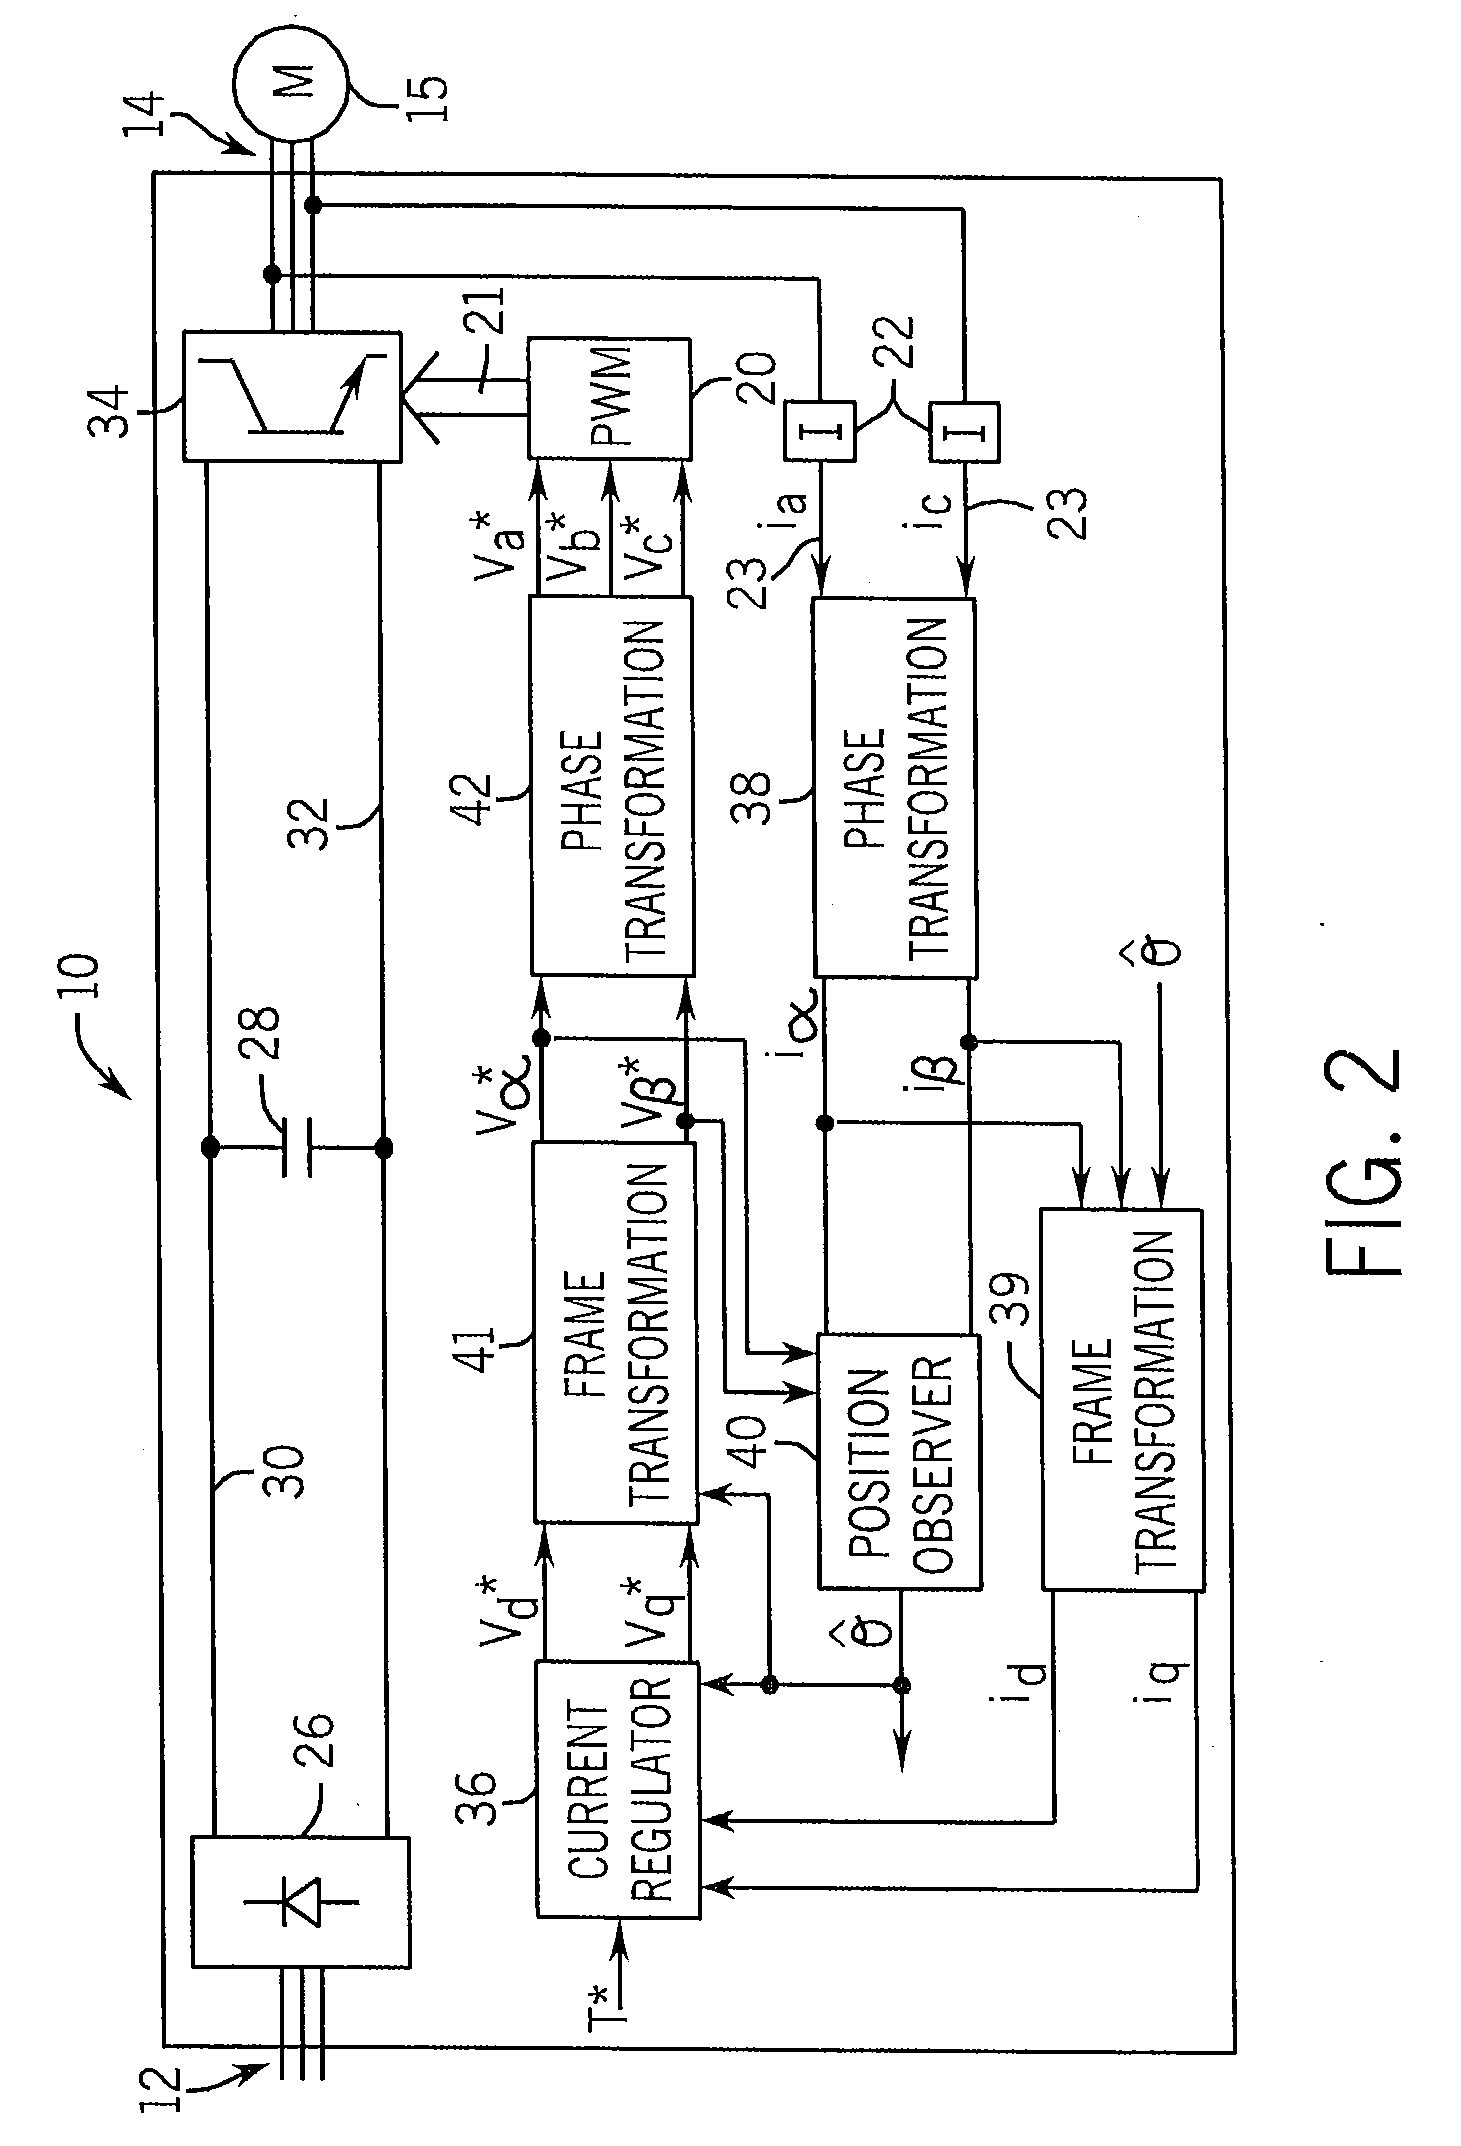 Method and Apparatus for Estimating Rotor Position in a Sensorless Synchronous Motor